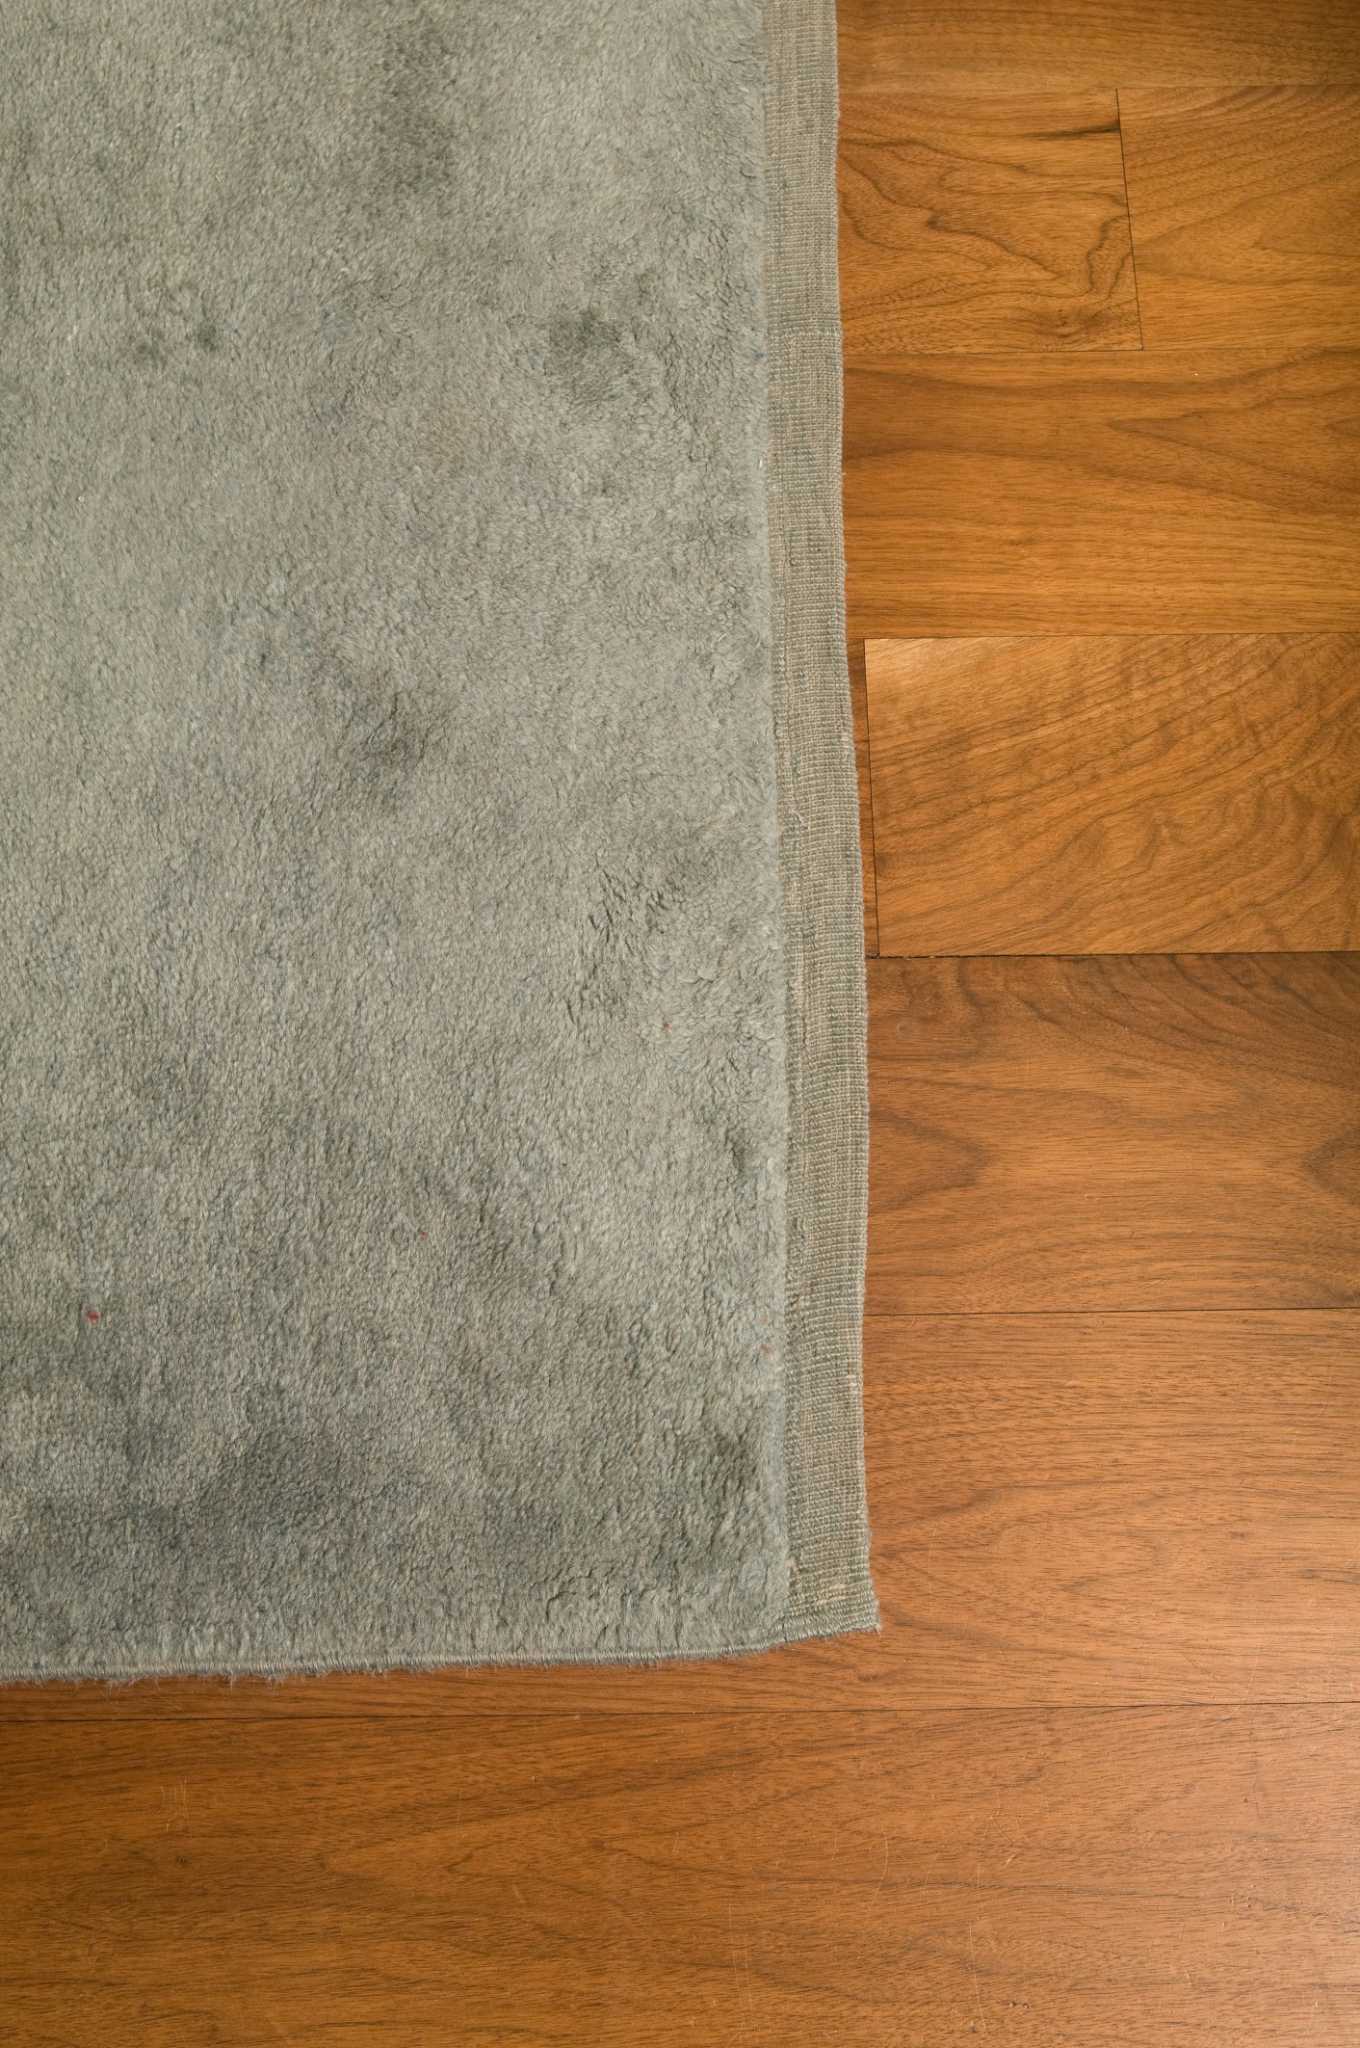 How to Use Rubber-Backed Rugs on Wood Flooring